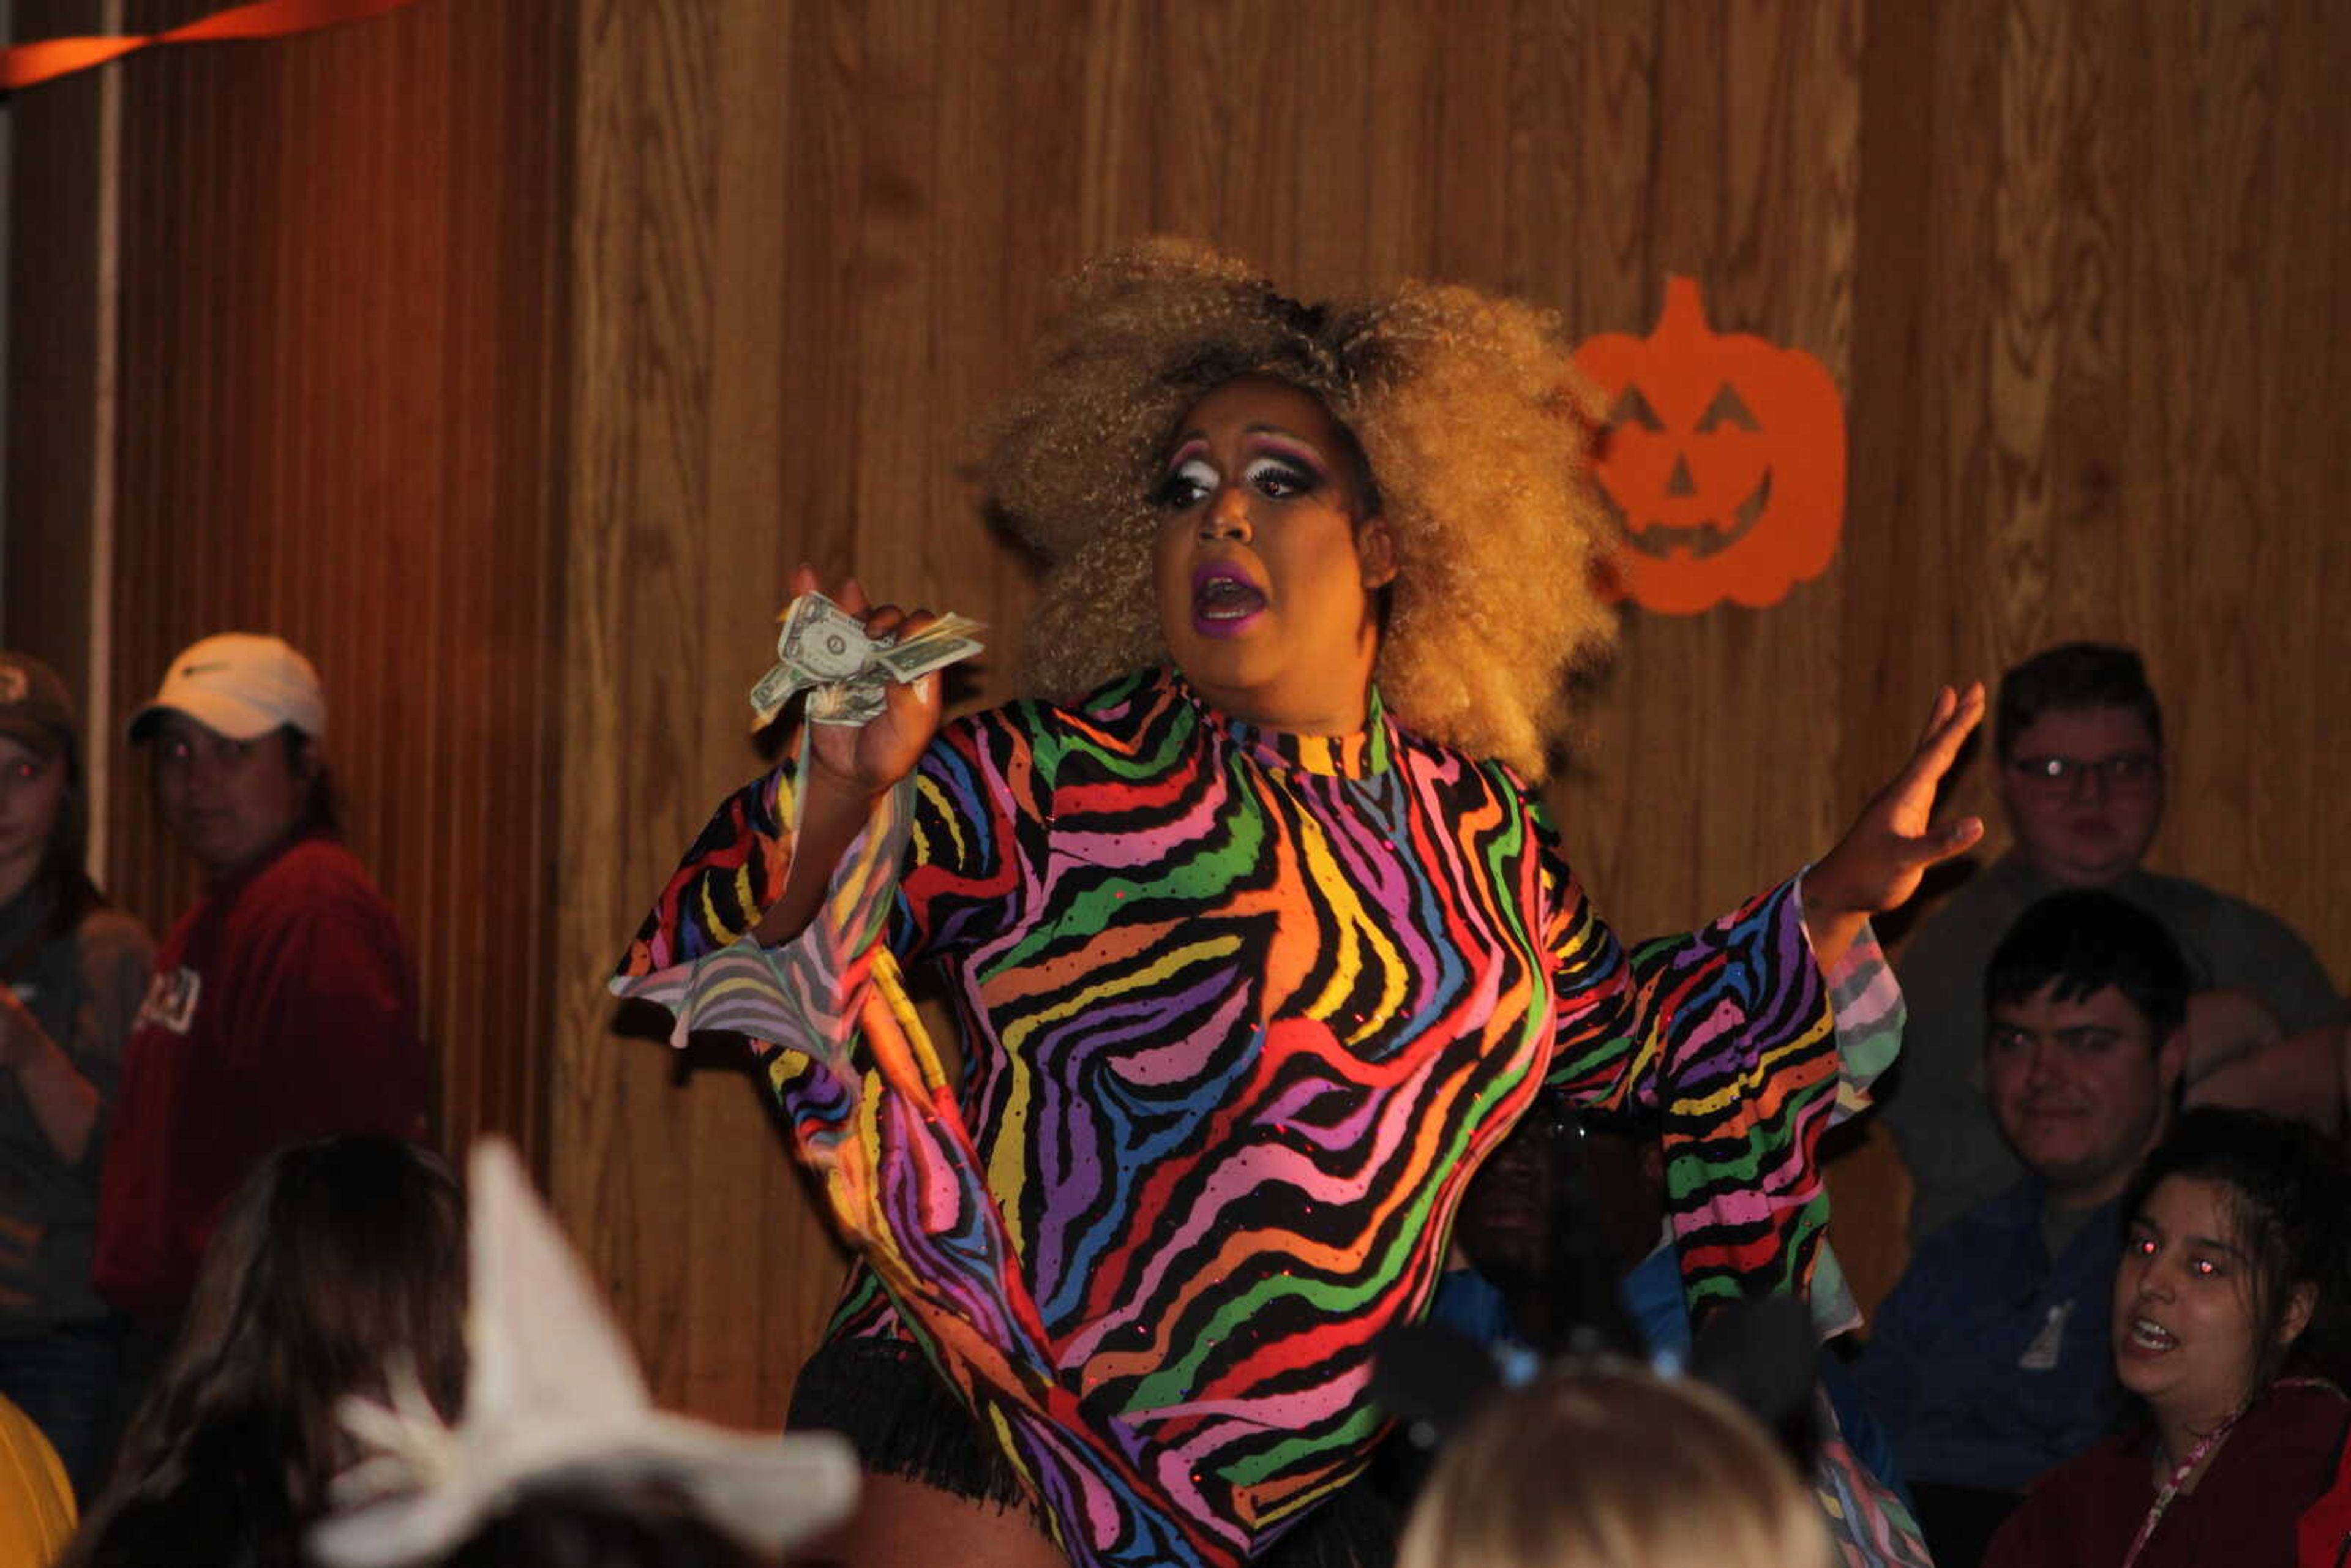 Drag Queen collecting money at Drag Show held by SEMO Pride on Oct. 18.